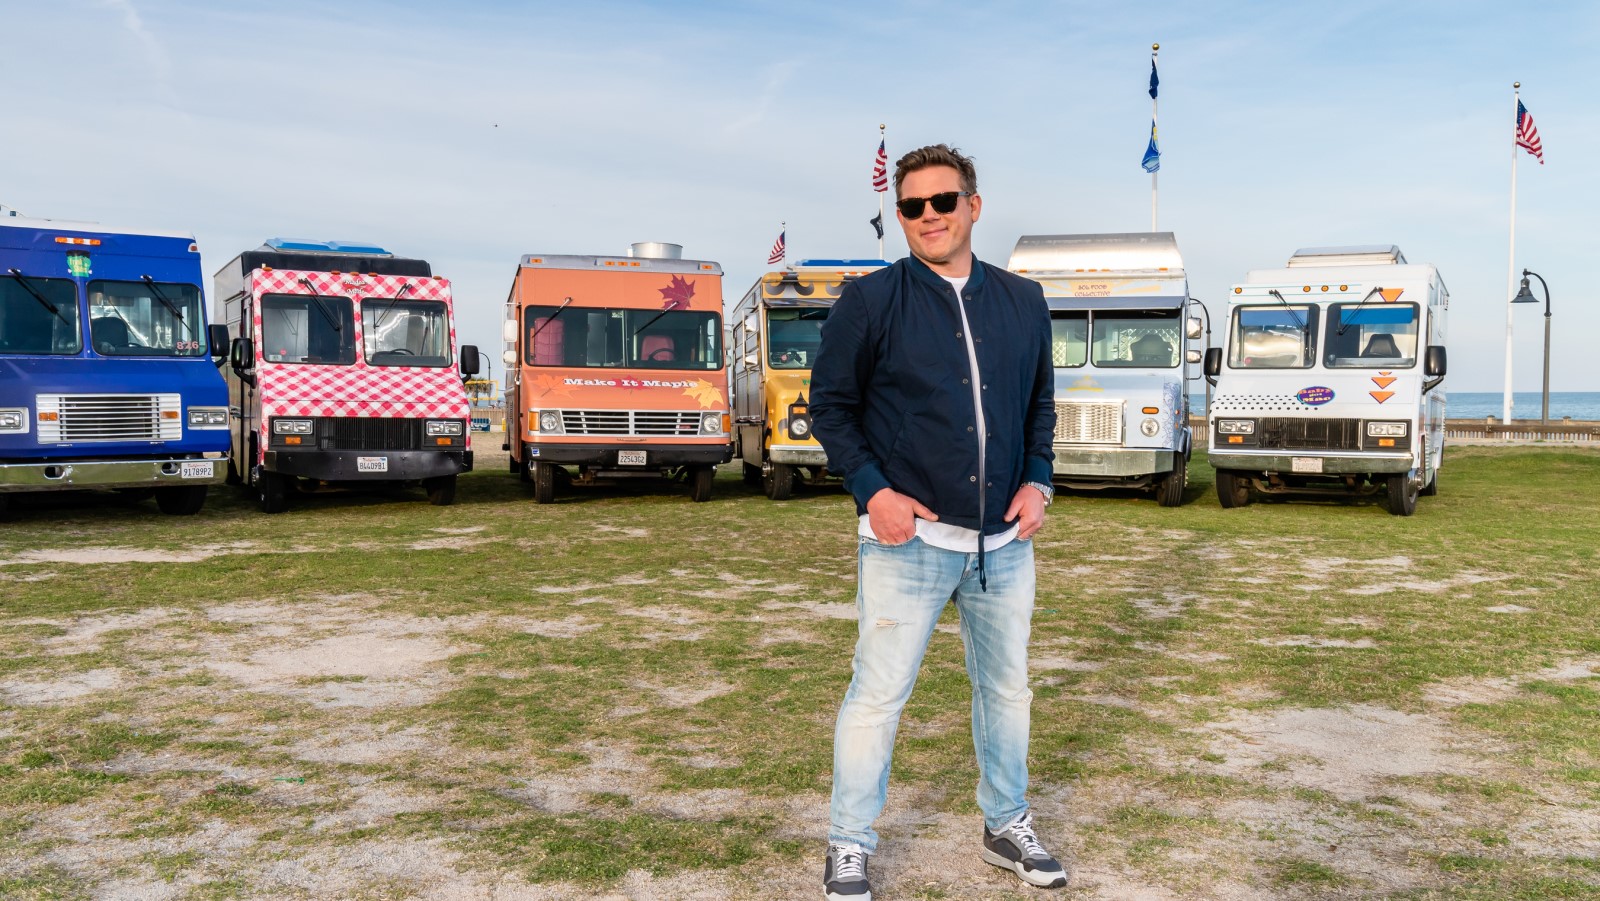 How to Watch The Great Food Truck Race Online